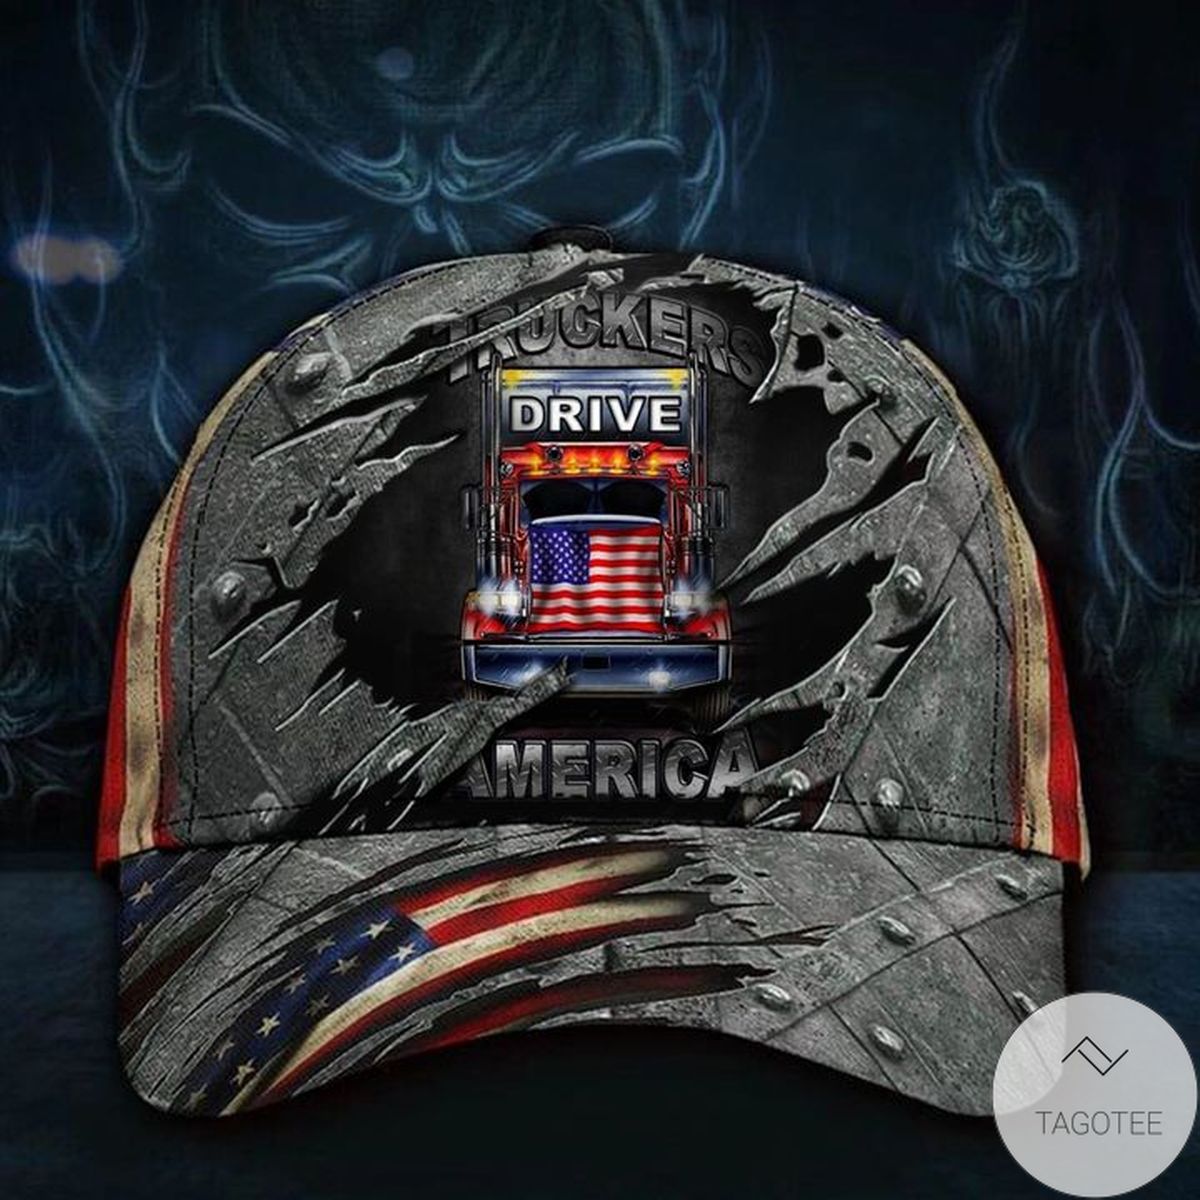 Truckers Drive America Hat 3D Printed Vintage Men's Cap For Truck Driver Father's Day Gift Idea